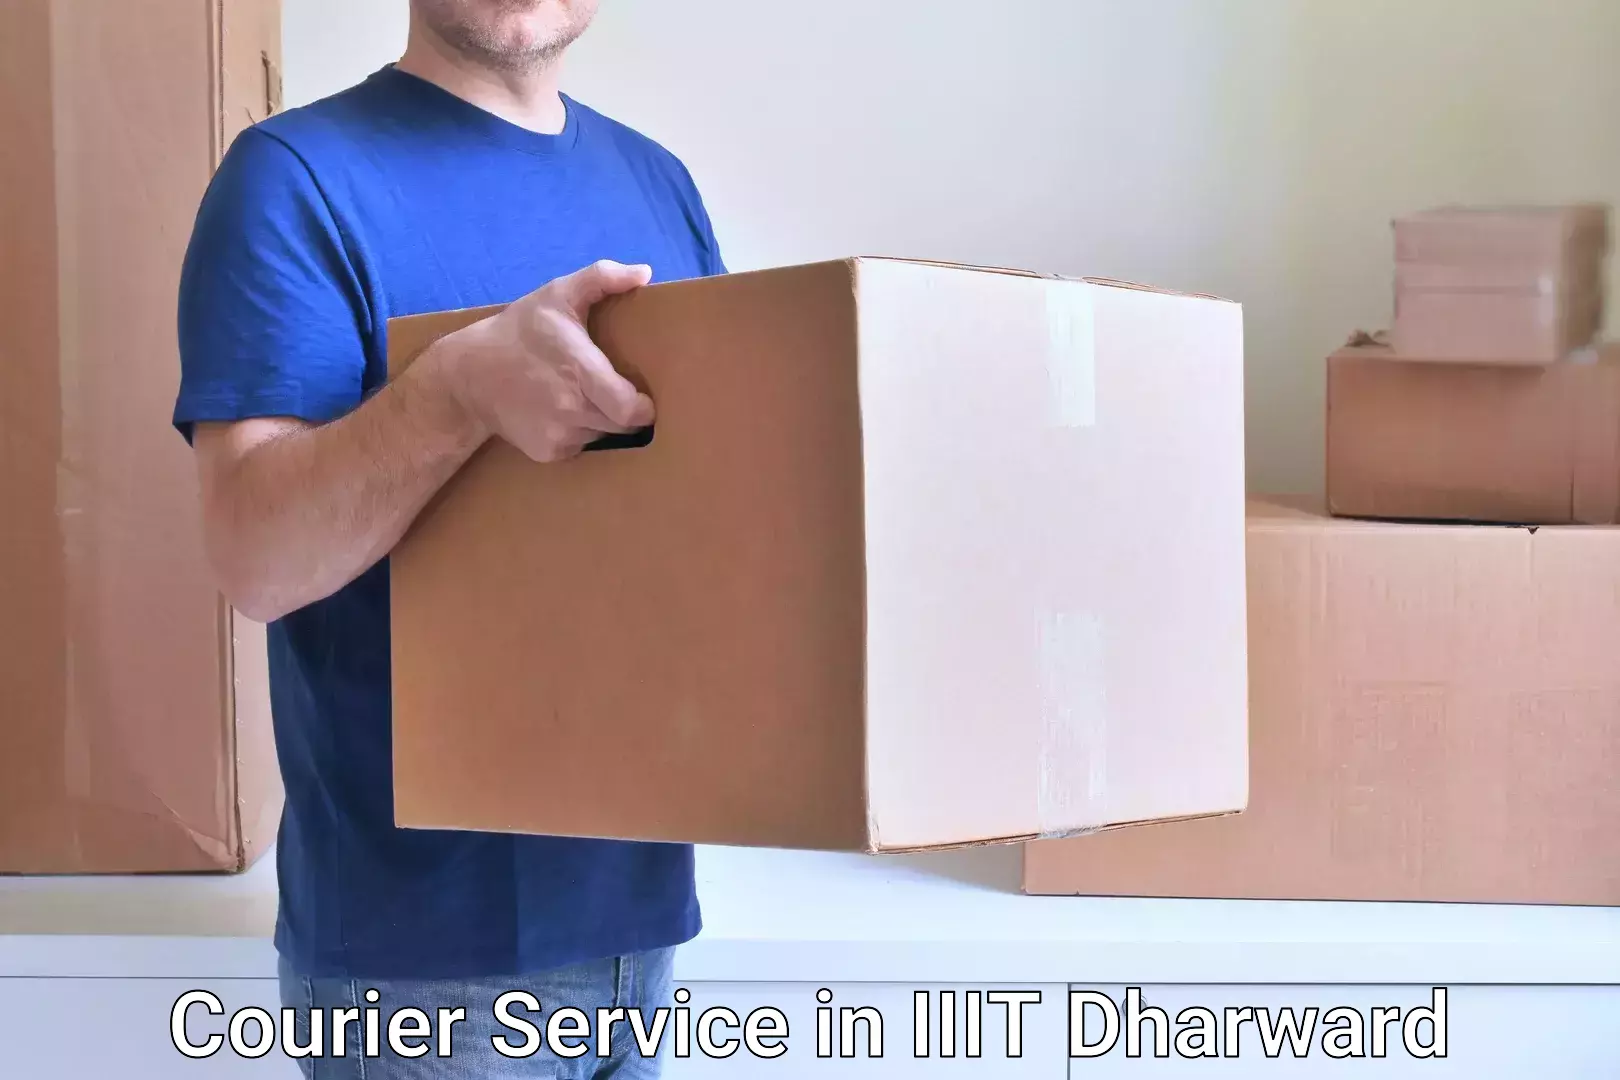 Fast-track shipping solutions in IIIT Dharward